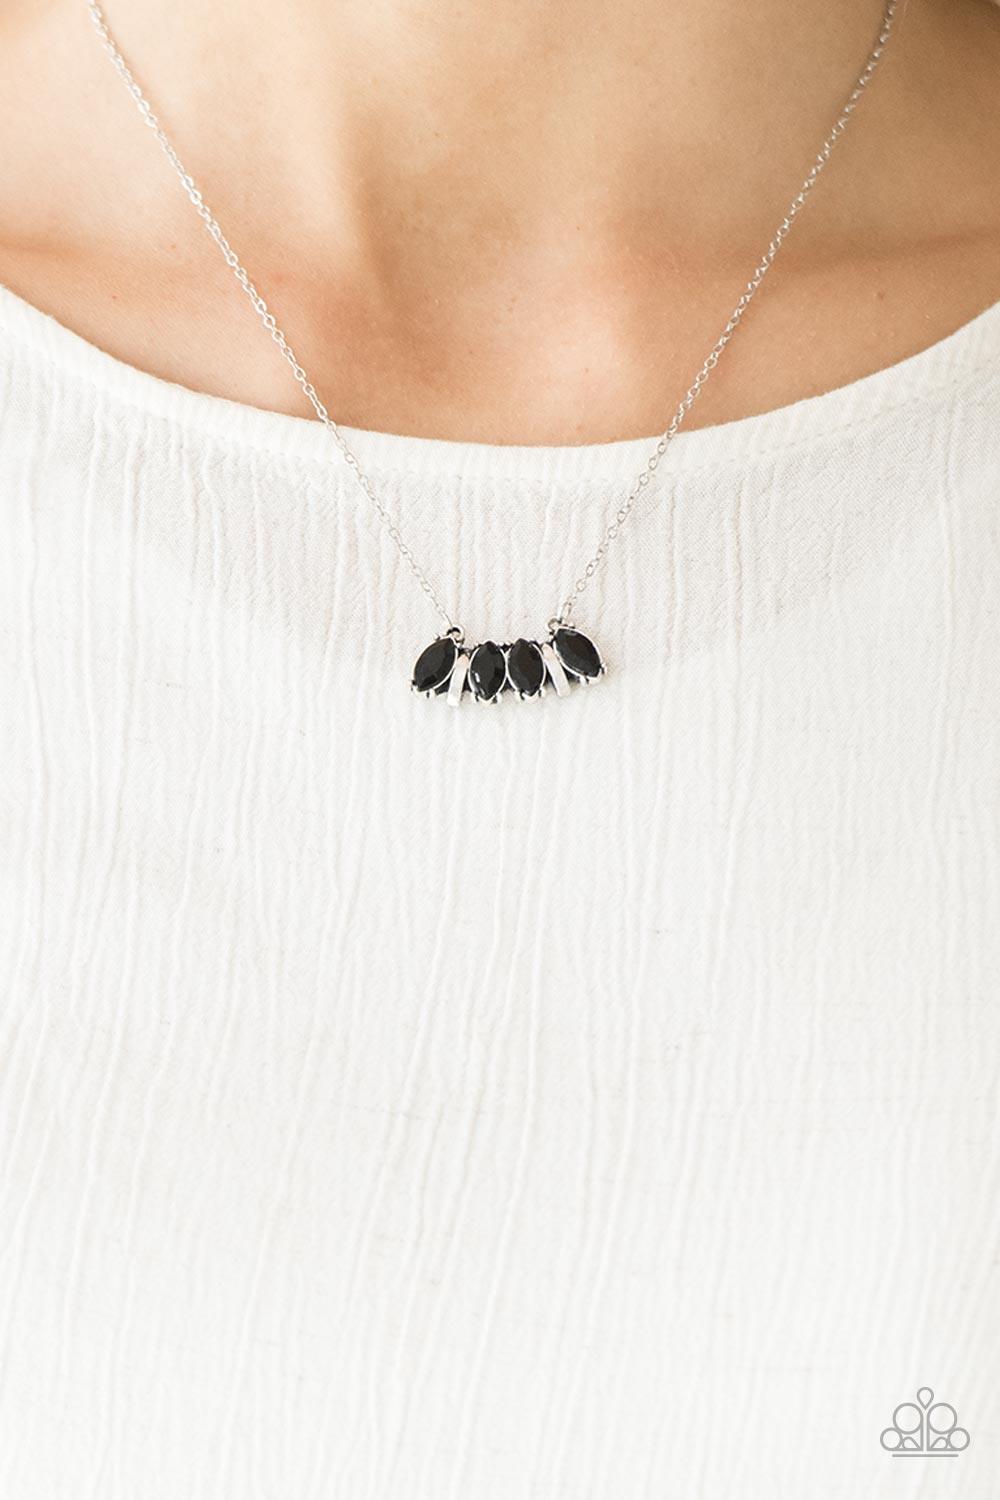 Paparazzi Accessories Deco Decadence - Black Featuring elegant marquise style cuts, glittery black rhinestones join with silver accents below the collar, creating a dainty pendant. Features an adjustable clasp closure. Sold as one individual necklace. Inc